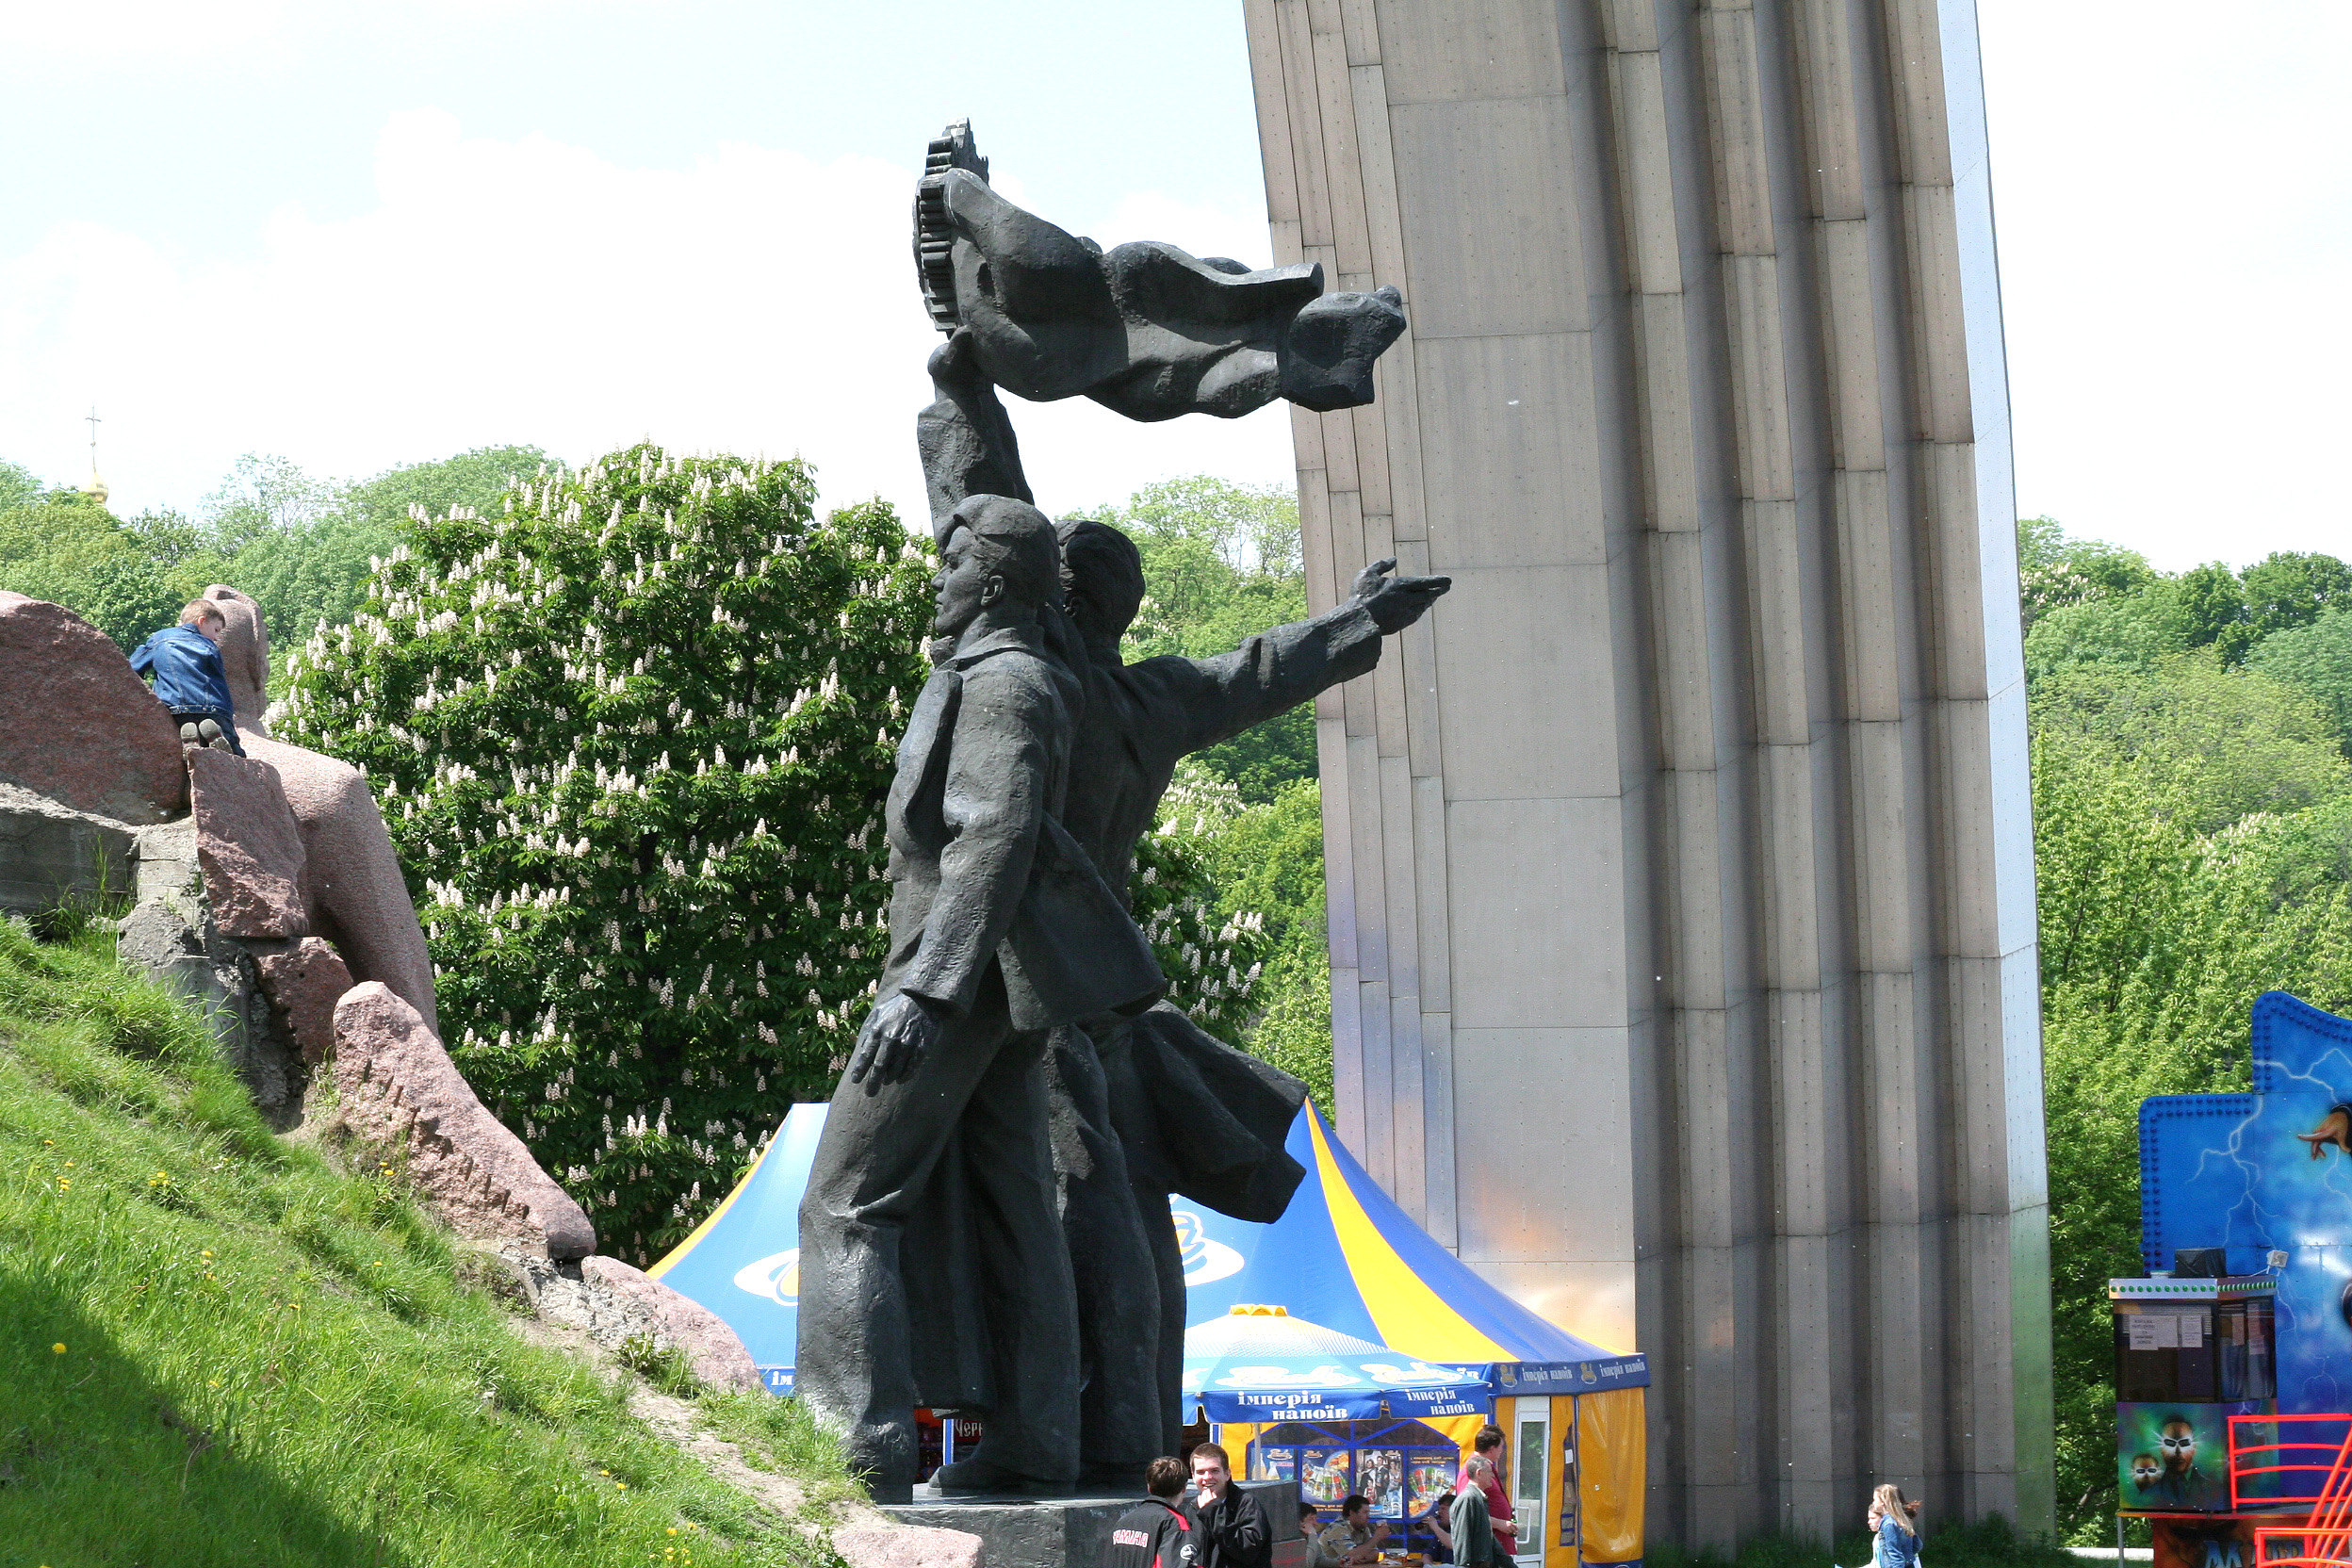 An interesting angle of the sculpture next to Peoples Friendship Monument.